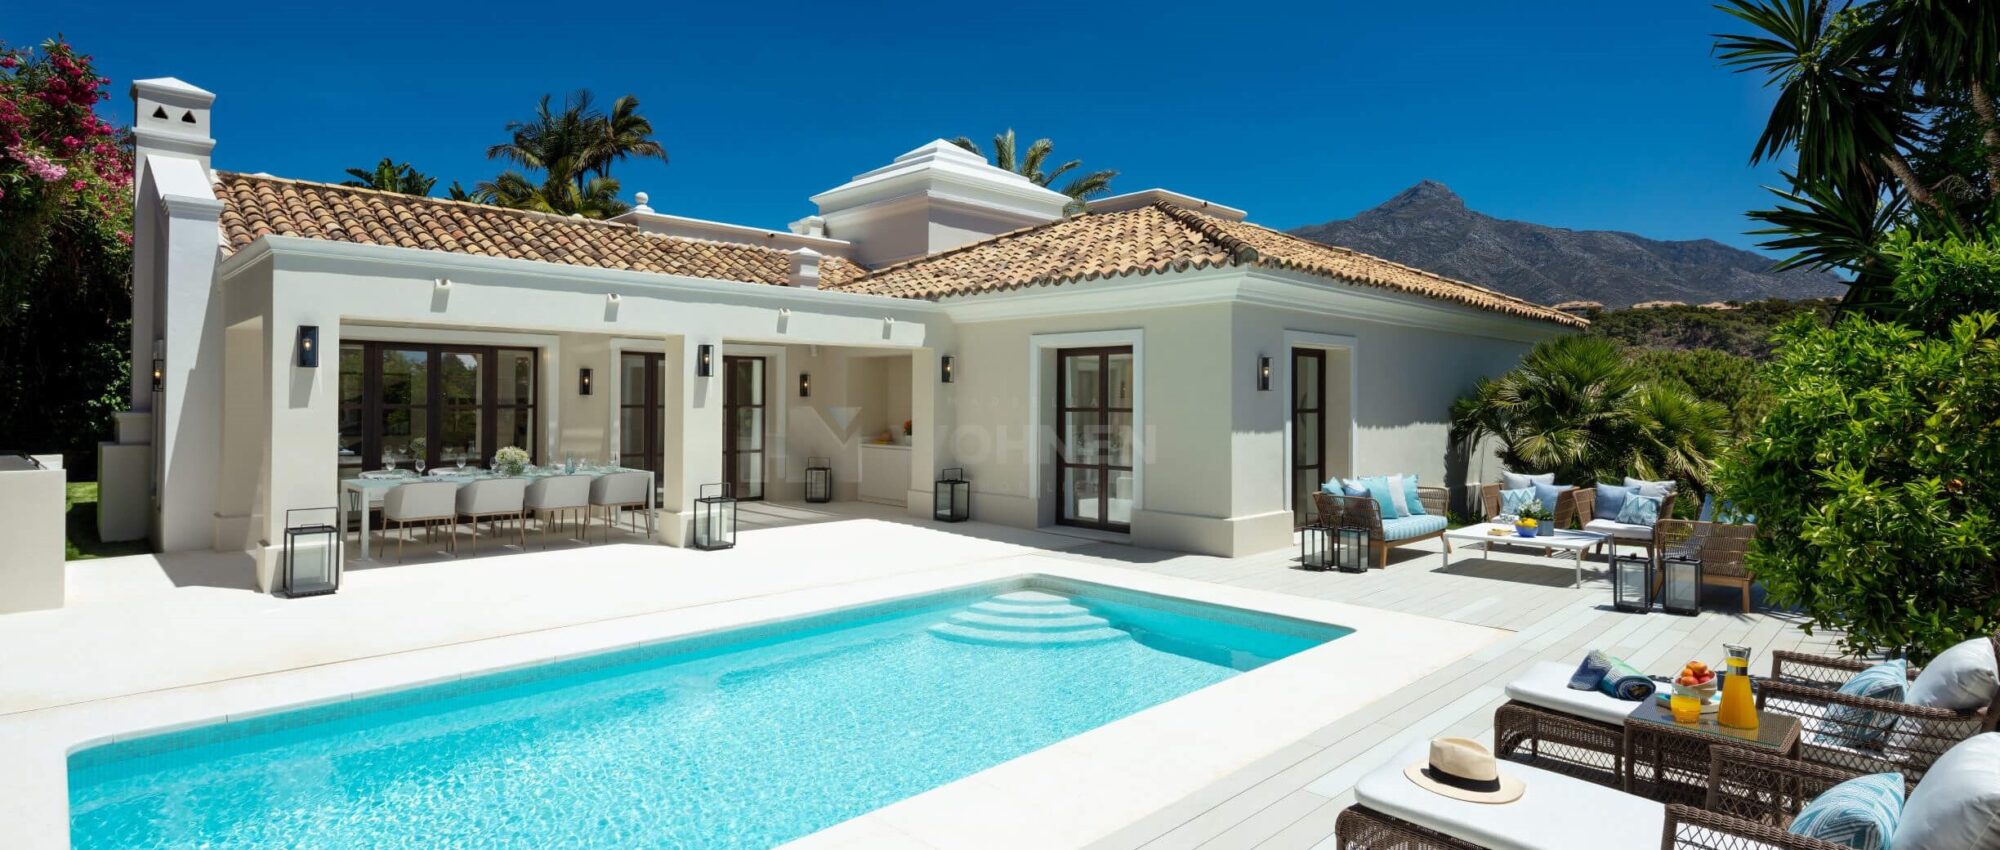 Luxury villa in the heart of the Golf Valley in Marbella